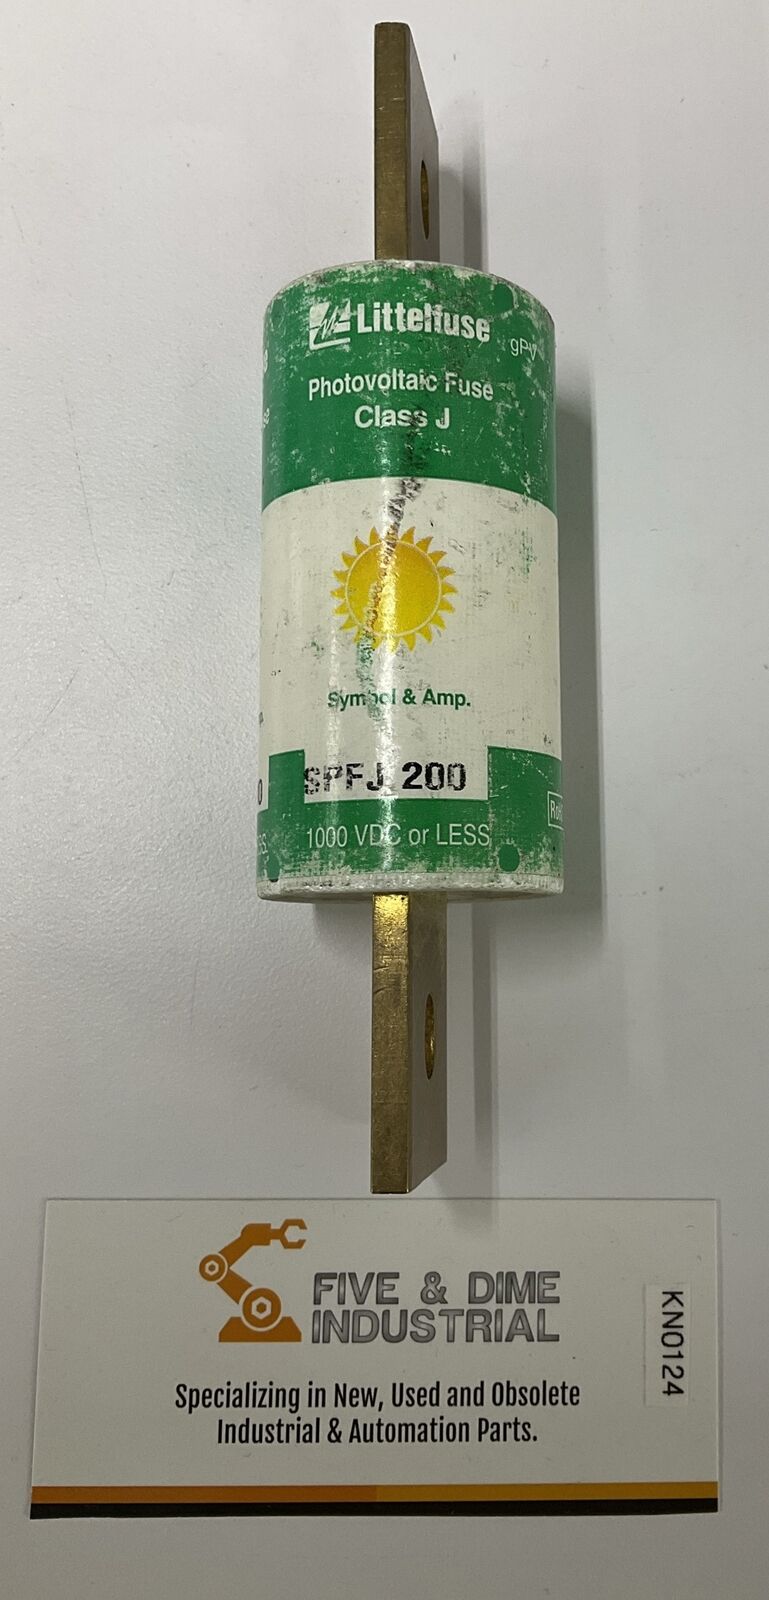 Littelfuse Spfj-200 Class J Photovoltaic Fuse 200A  1000 vdc or Less (CL347)